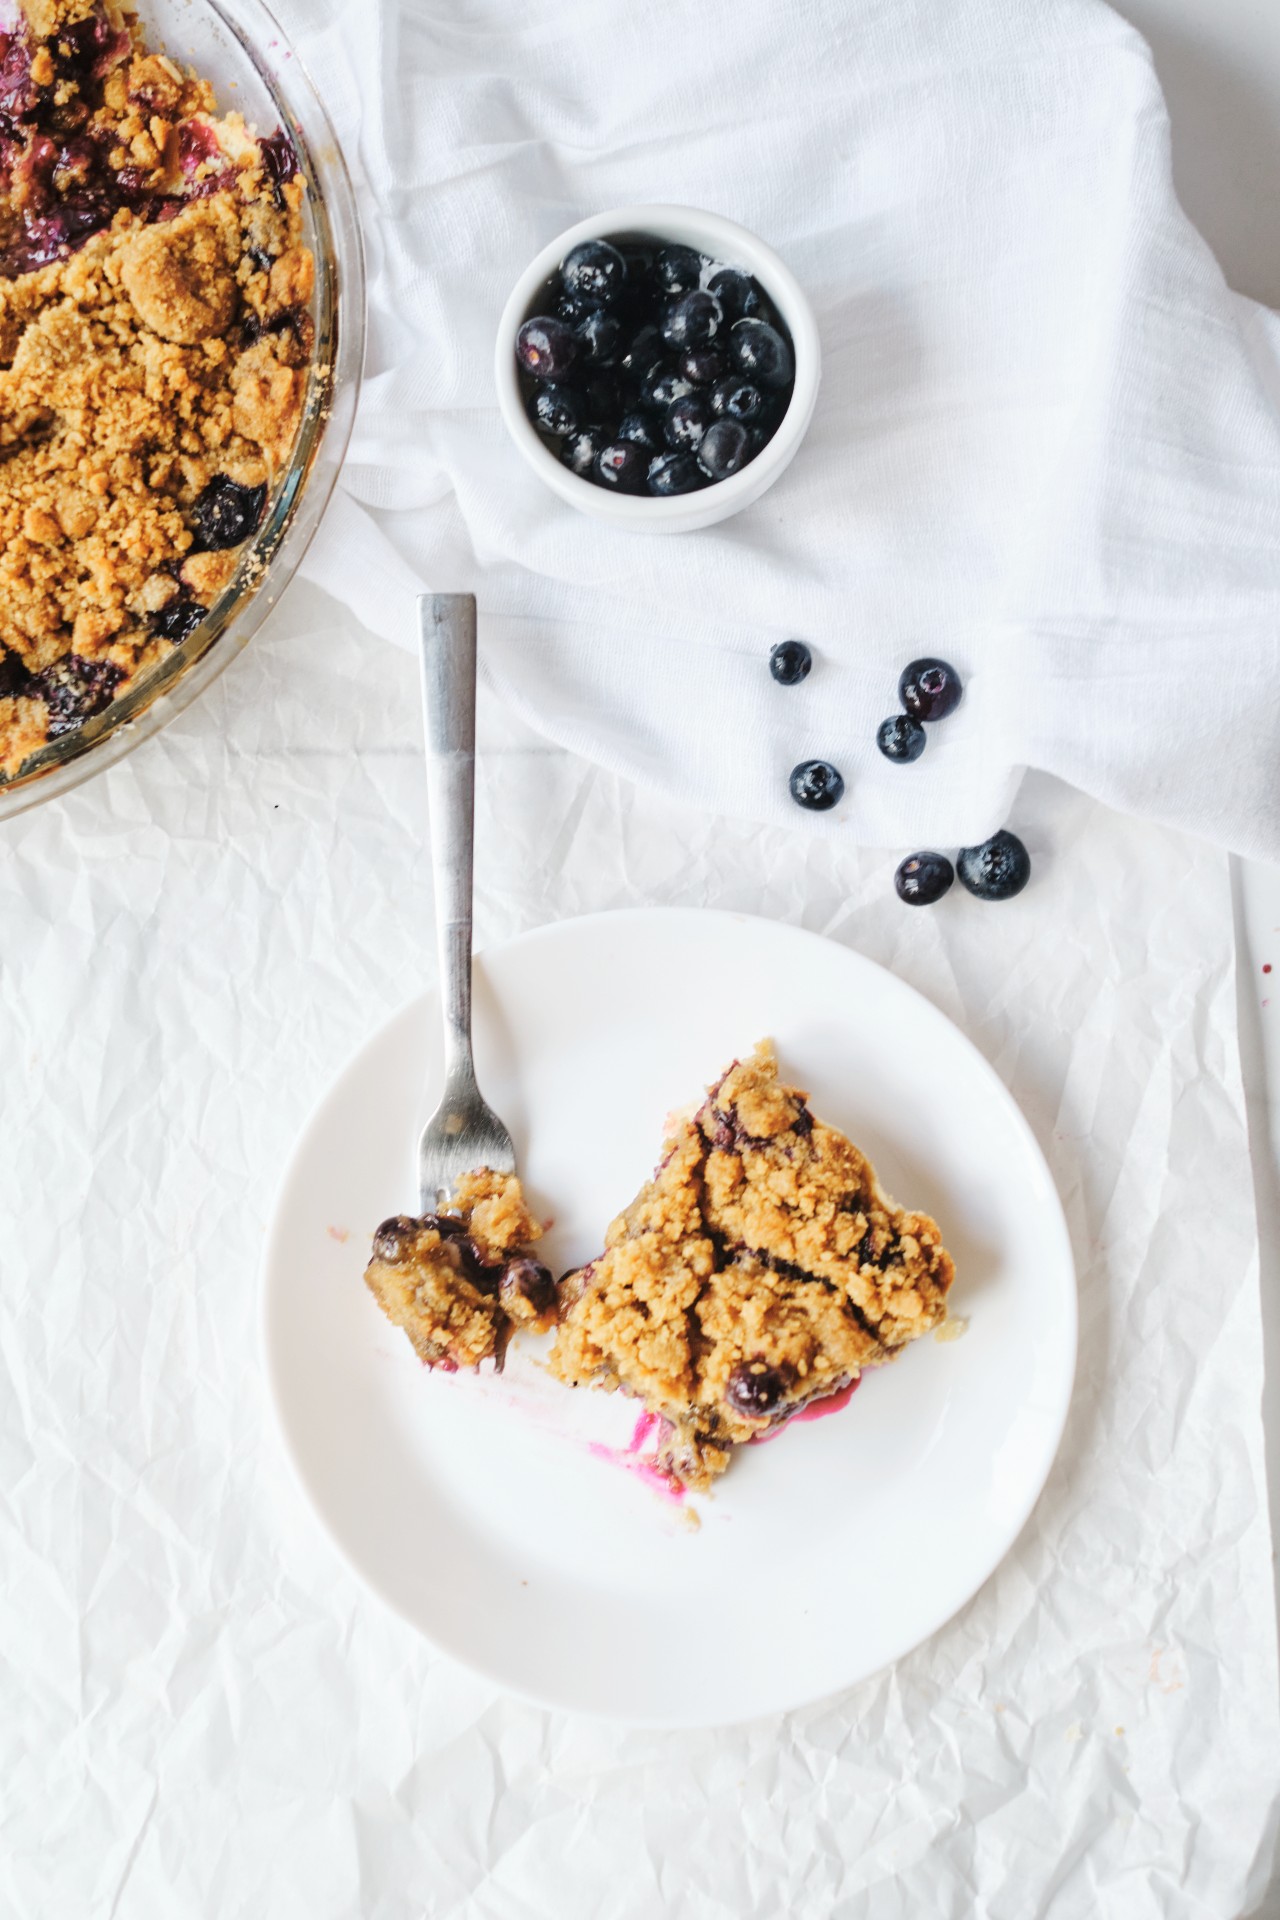 Simply the Best Blueberry Crumble Pie Recipe